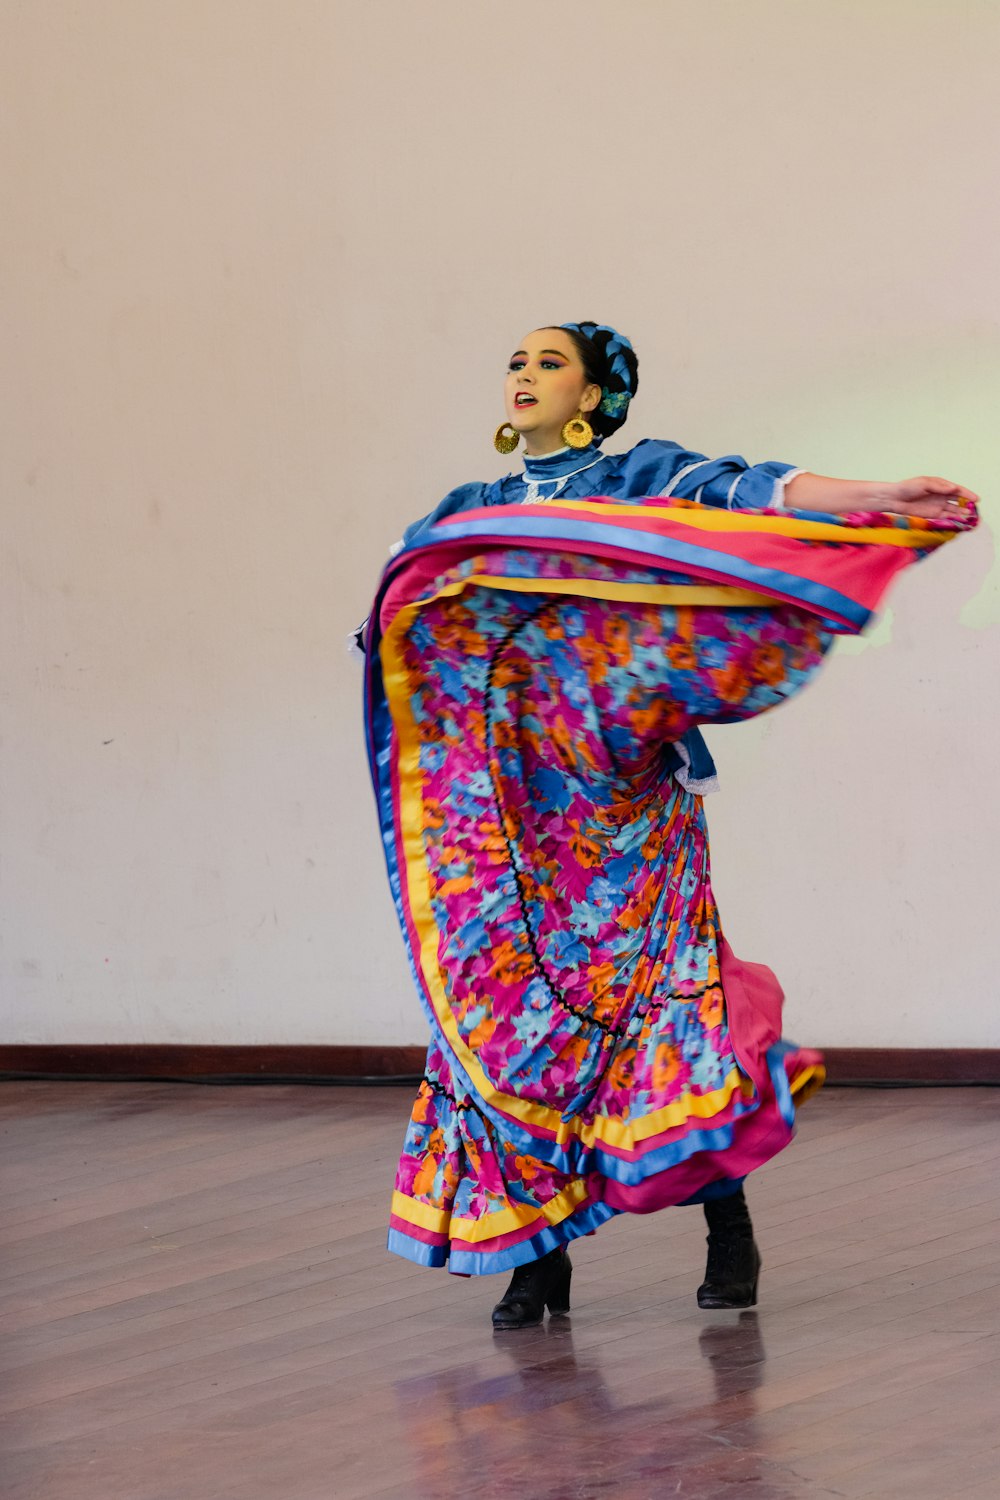 a woman in a colorful dress dancing on a wooden floor